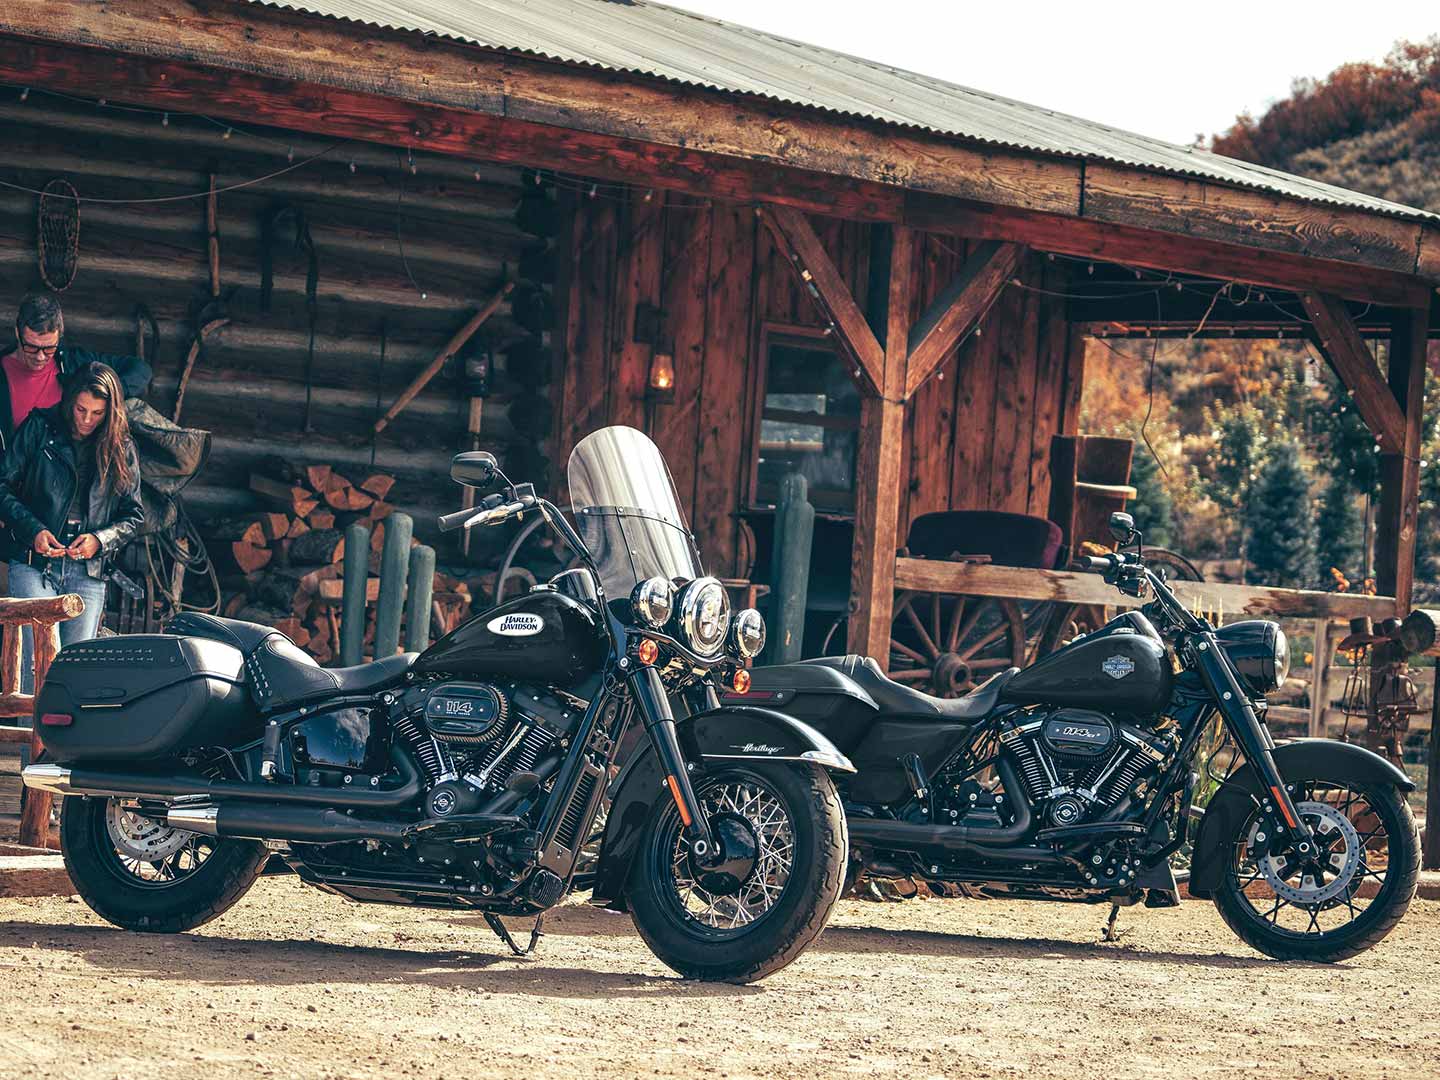 Harley-Davidson's reputation as an 'old, white-guy brand' may be